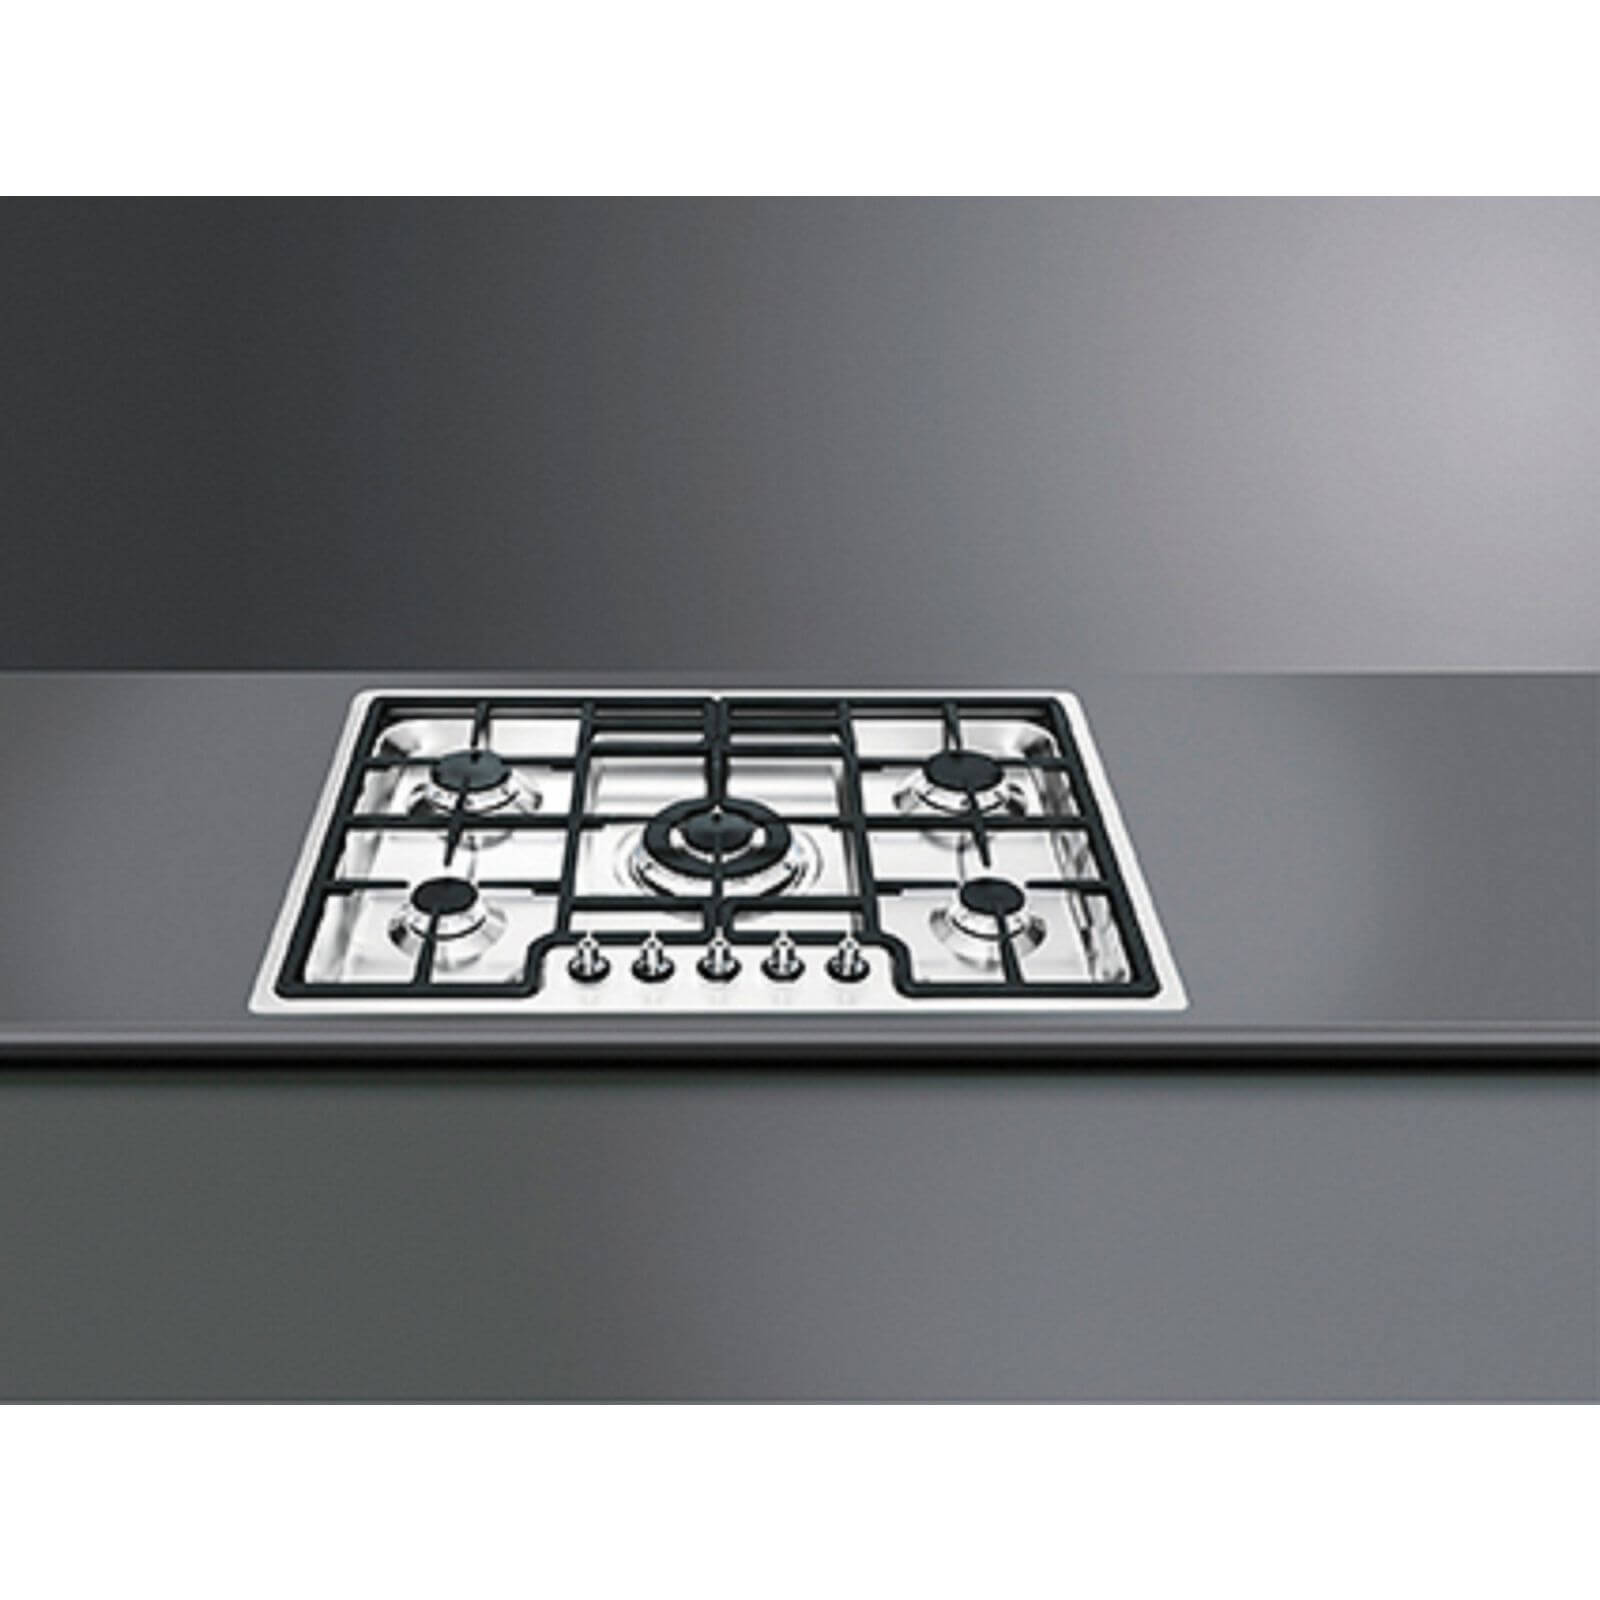 Smeg PGF75-4 Ultra low Profile Gas Hob - Stainless Steel